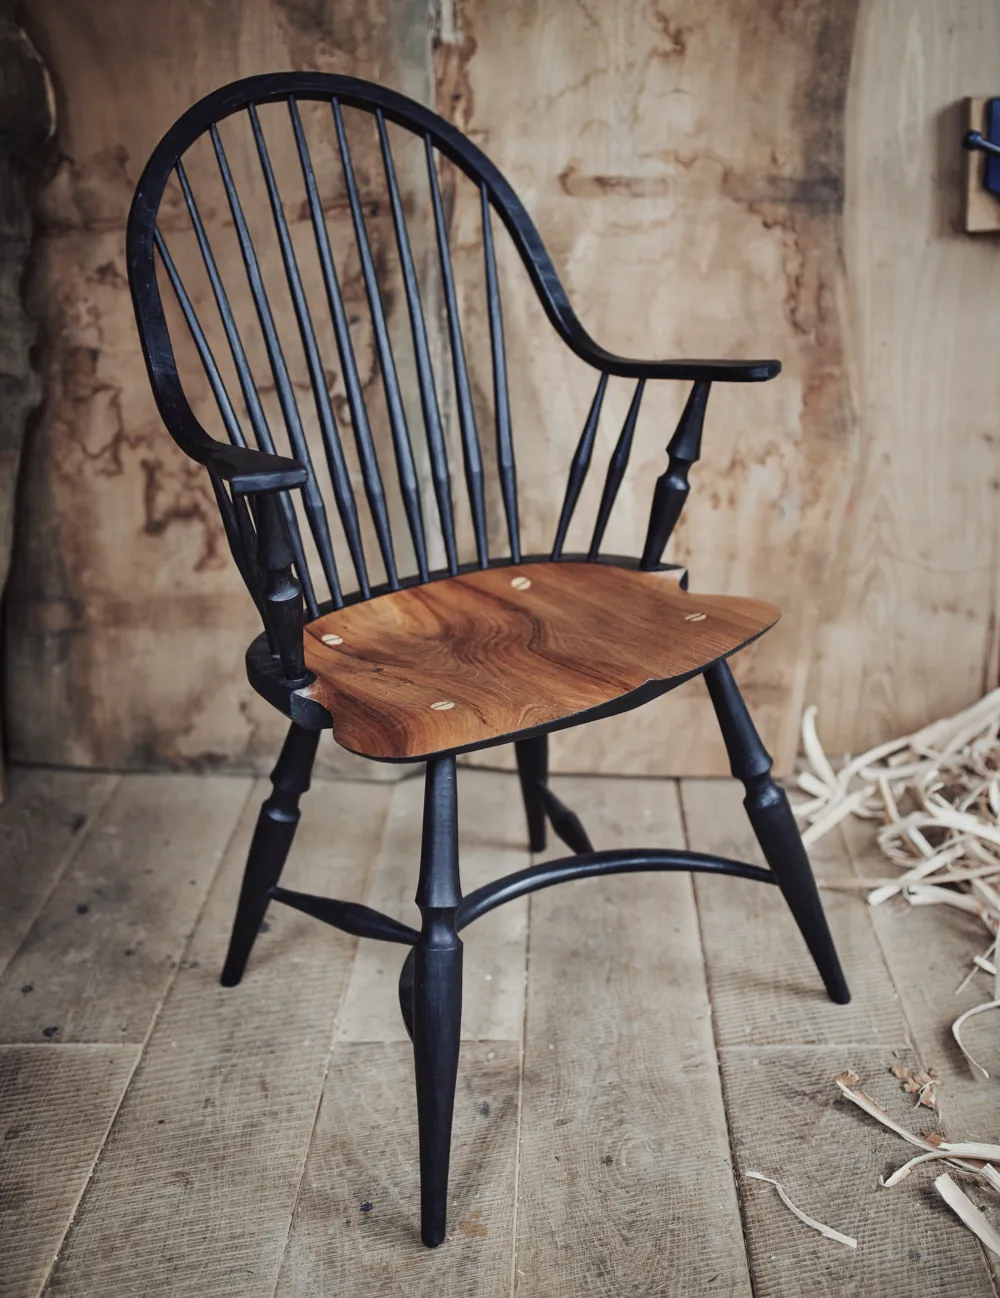 One of Jason's Windsor chairs